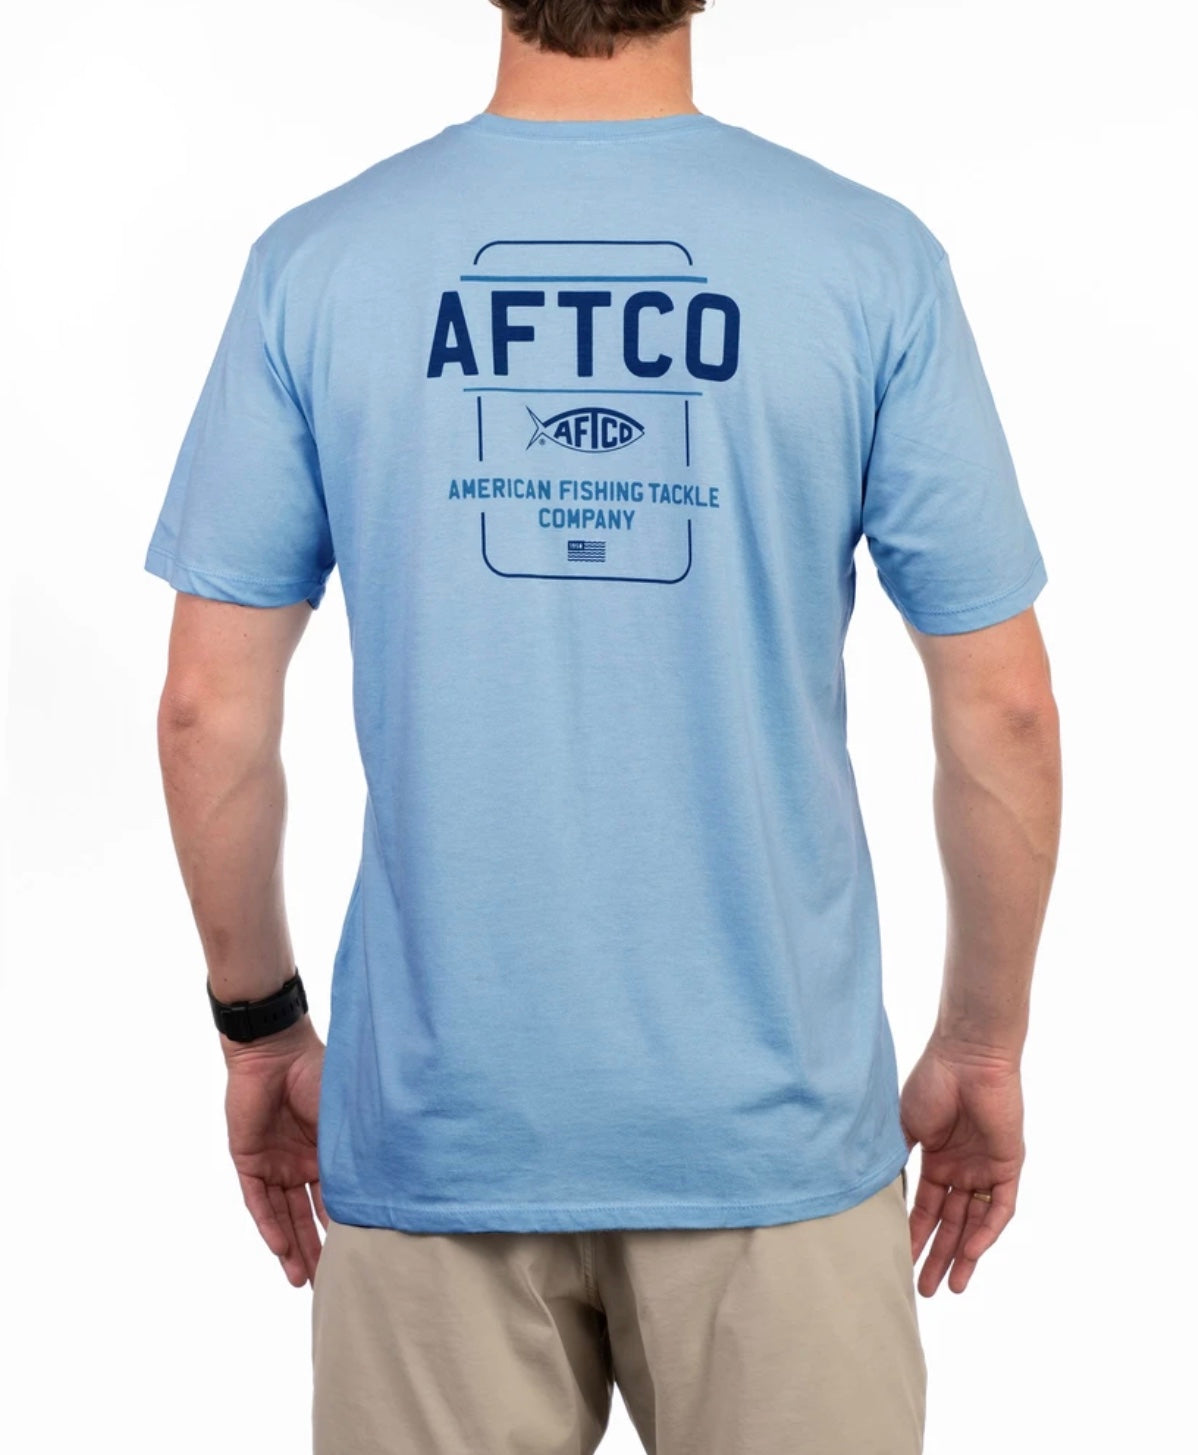 AFTCO American Fishing Tackle Co Men's T Shirt Size L Blue Short